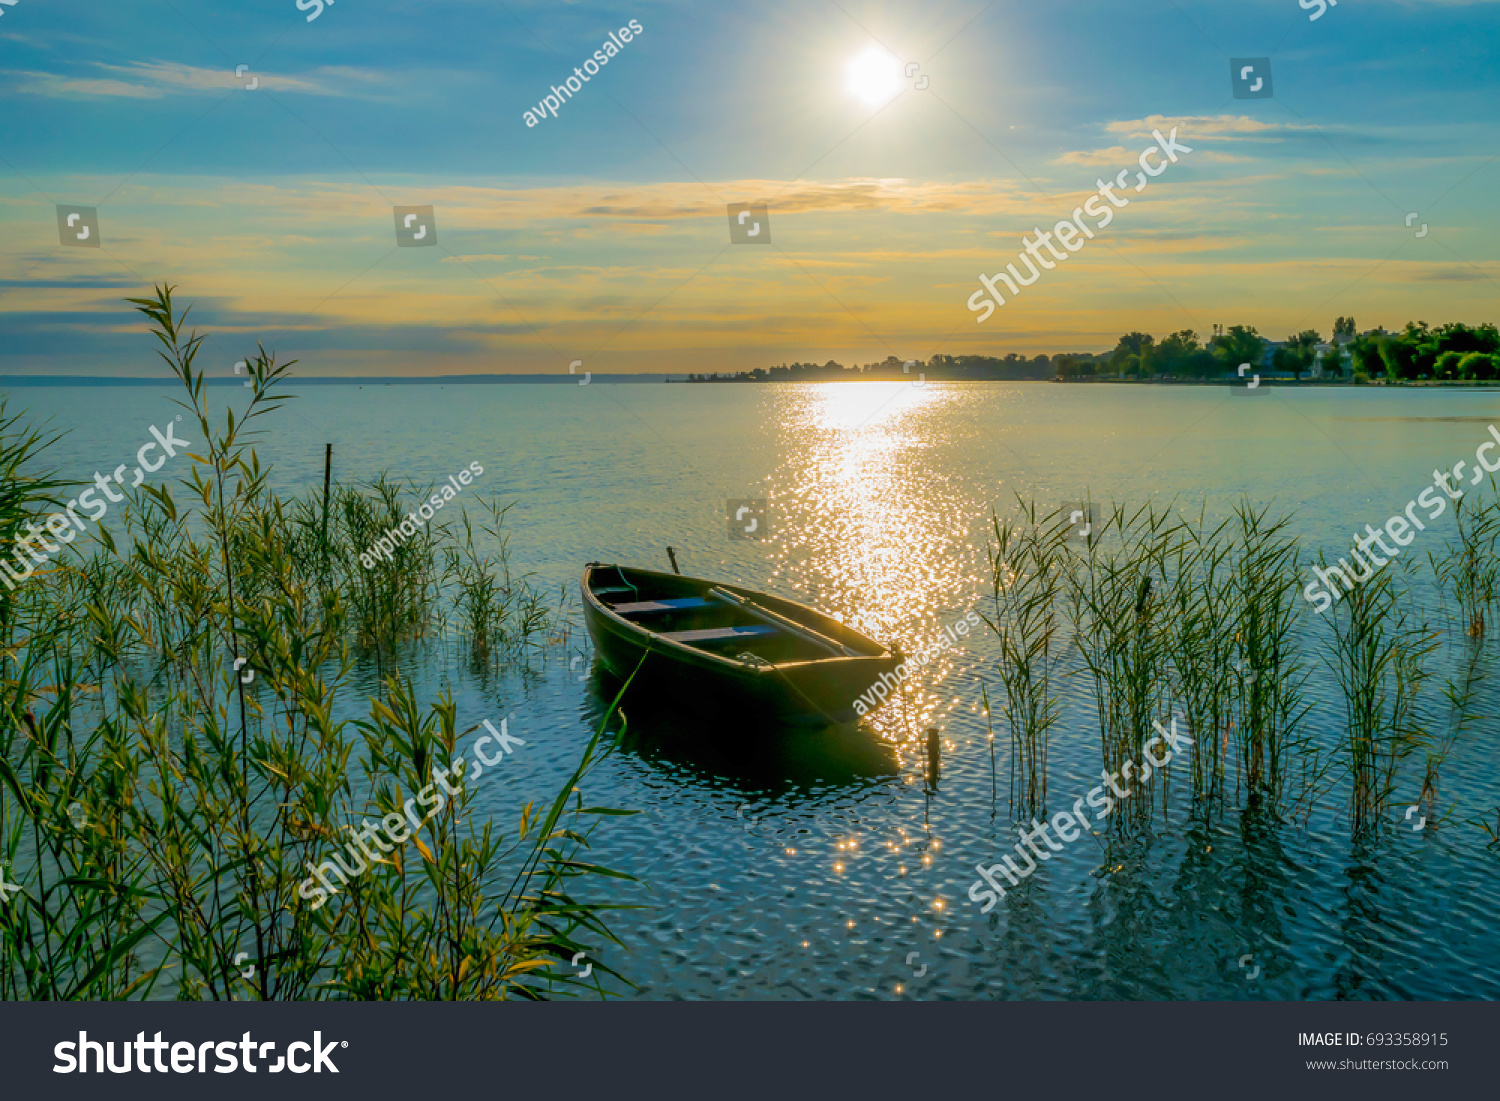 Rowing boat on lake at sunset
Small wooden rowing boat on a calm lake at sunset reed
 #693358915